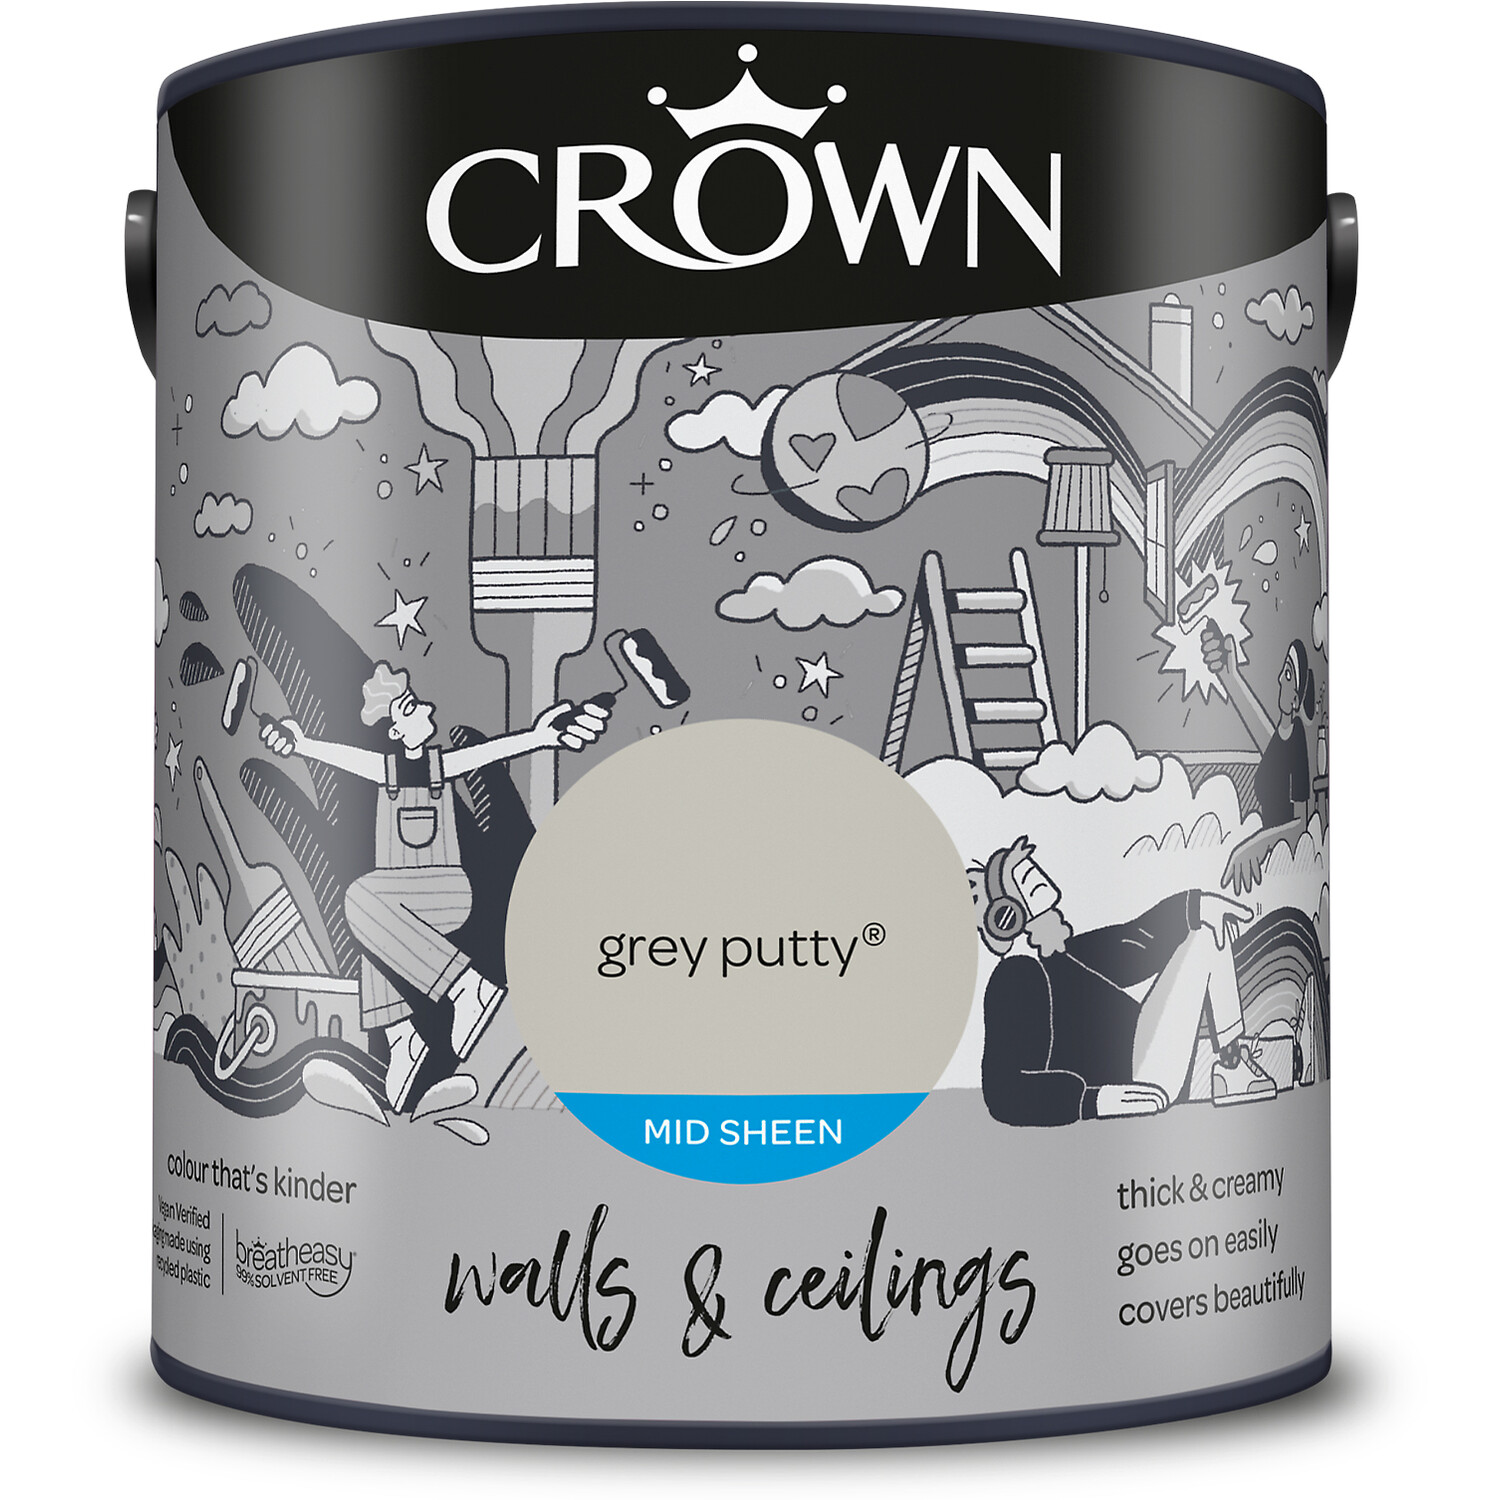 Crown Walls & Ceilings Grey Putty Mid Sheen Emulsion Paint 2.5L Image 2